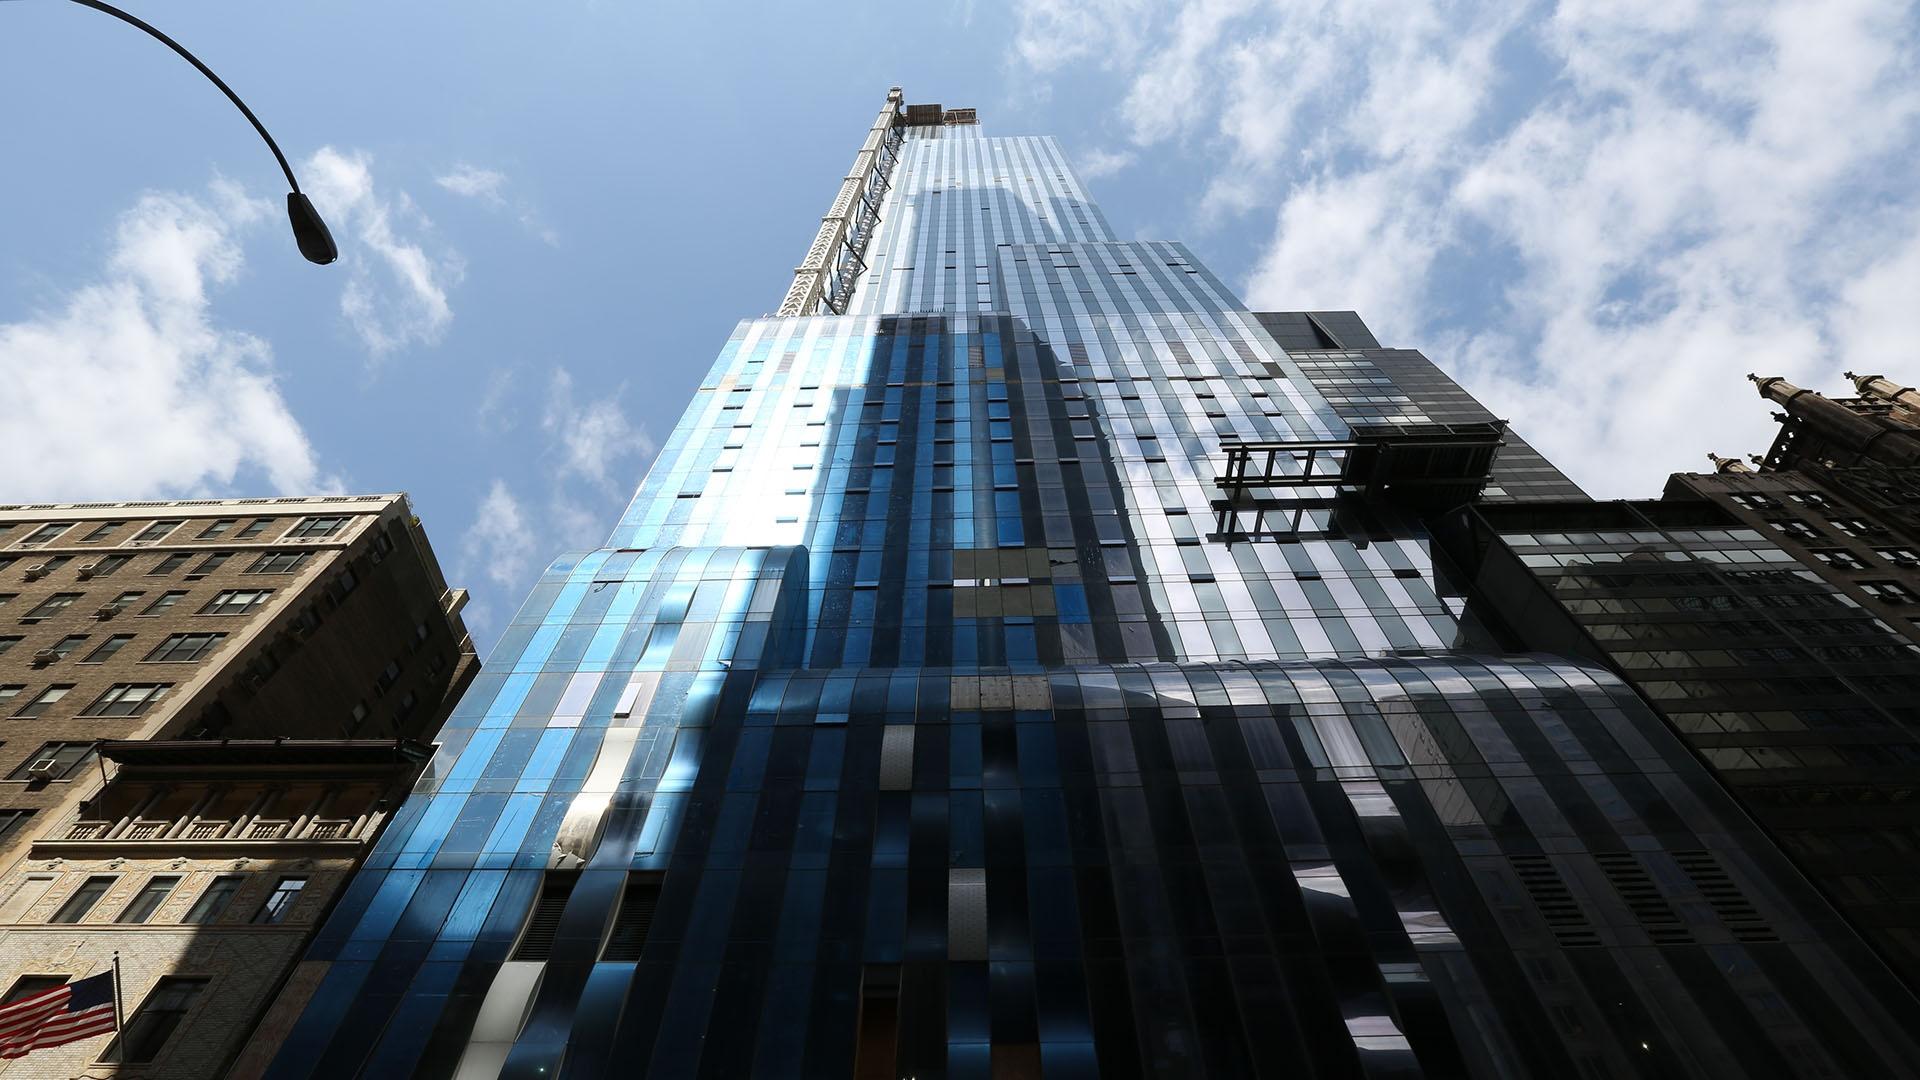 Image of One57 building